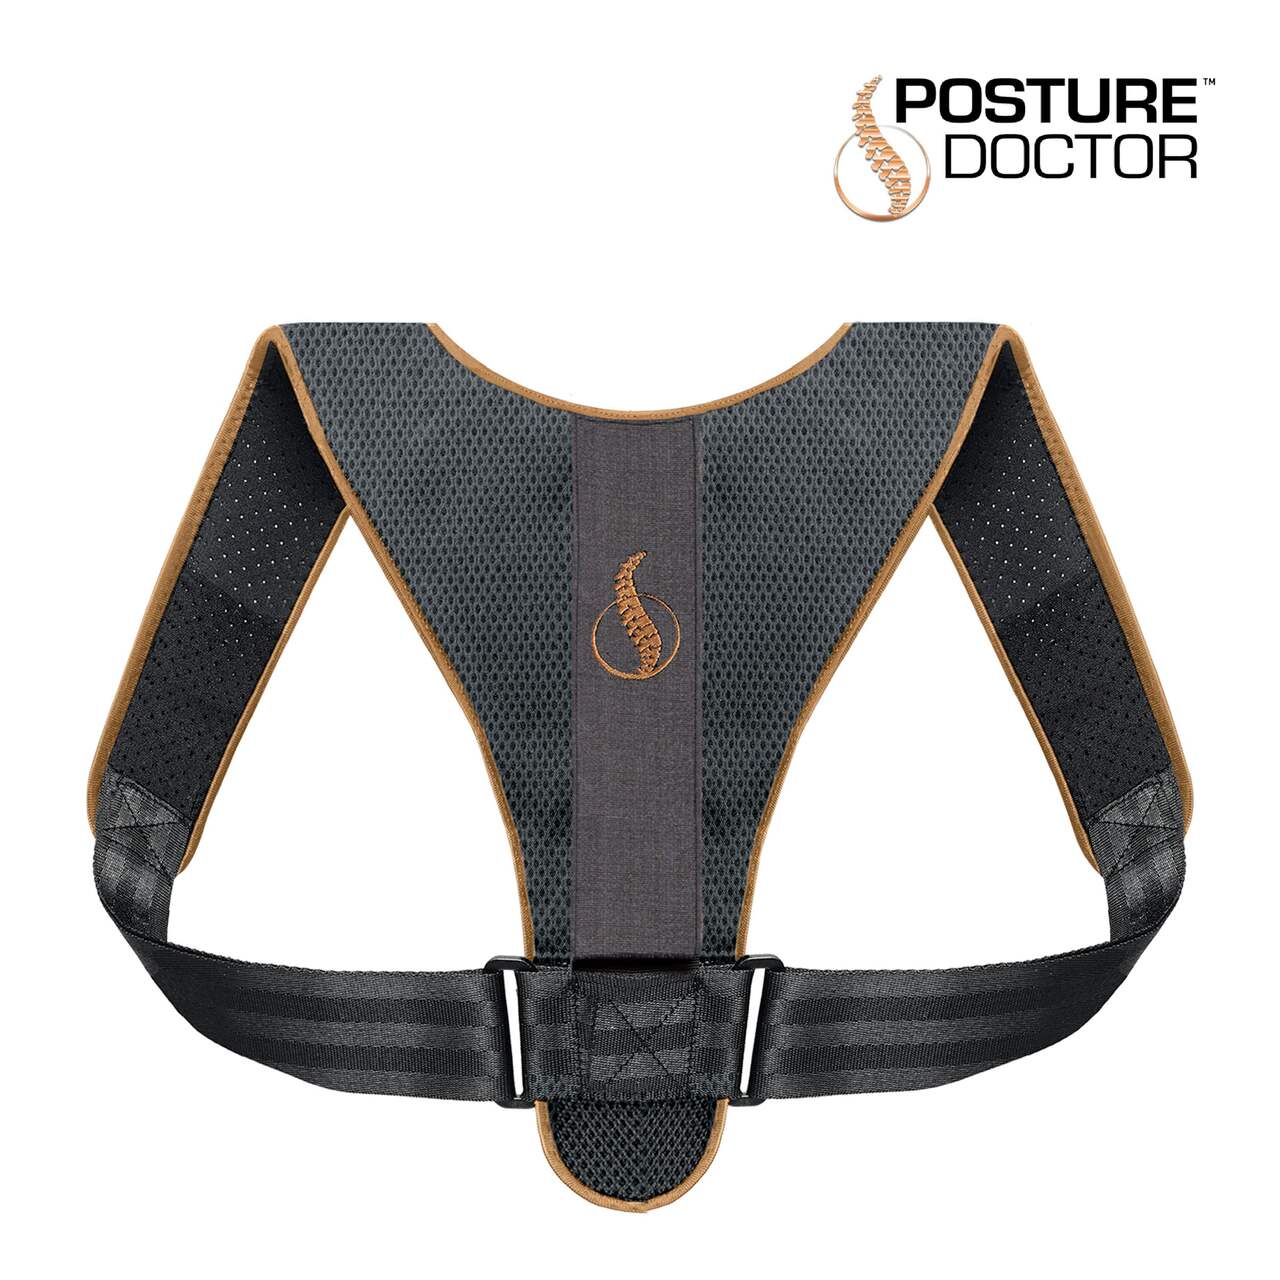 Looking for a posture corrector that is comfortable? Something that you can  easily wear as an under garment? Visit our website to see ho